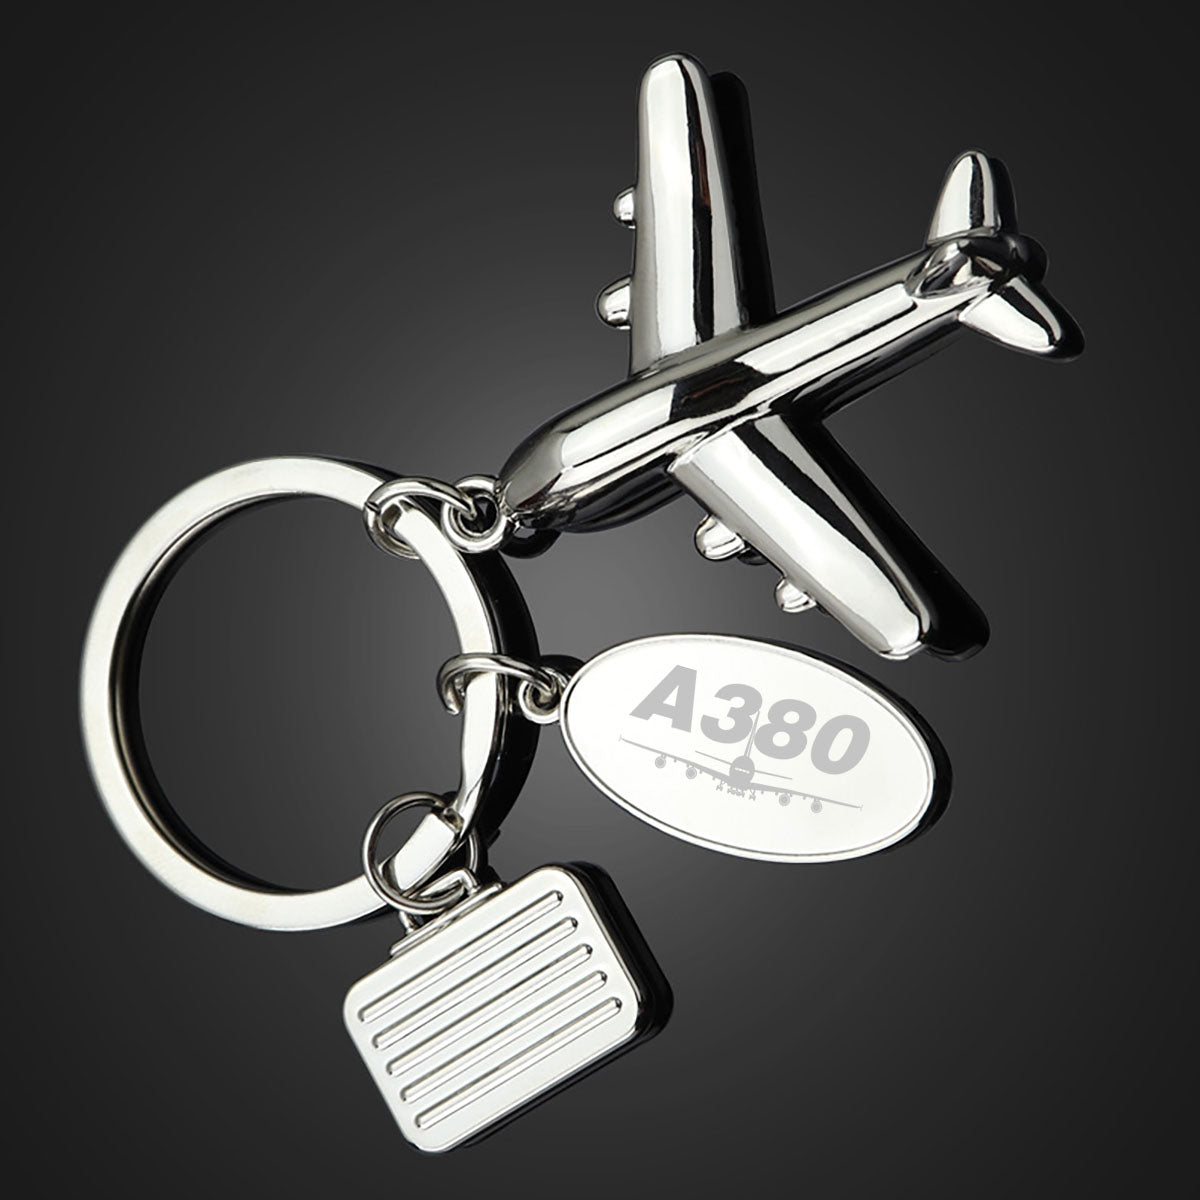 Super Airbus A380 Designed Suitcase Airplane Key Chains